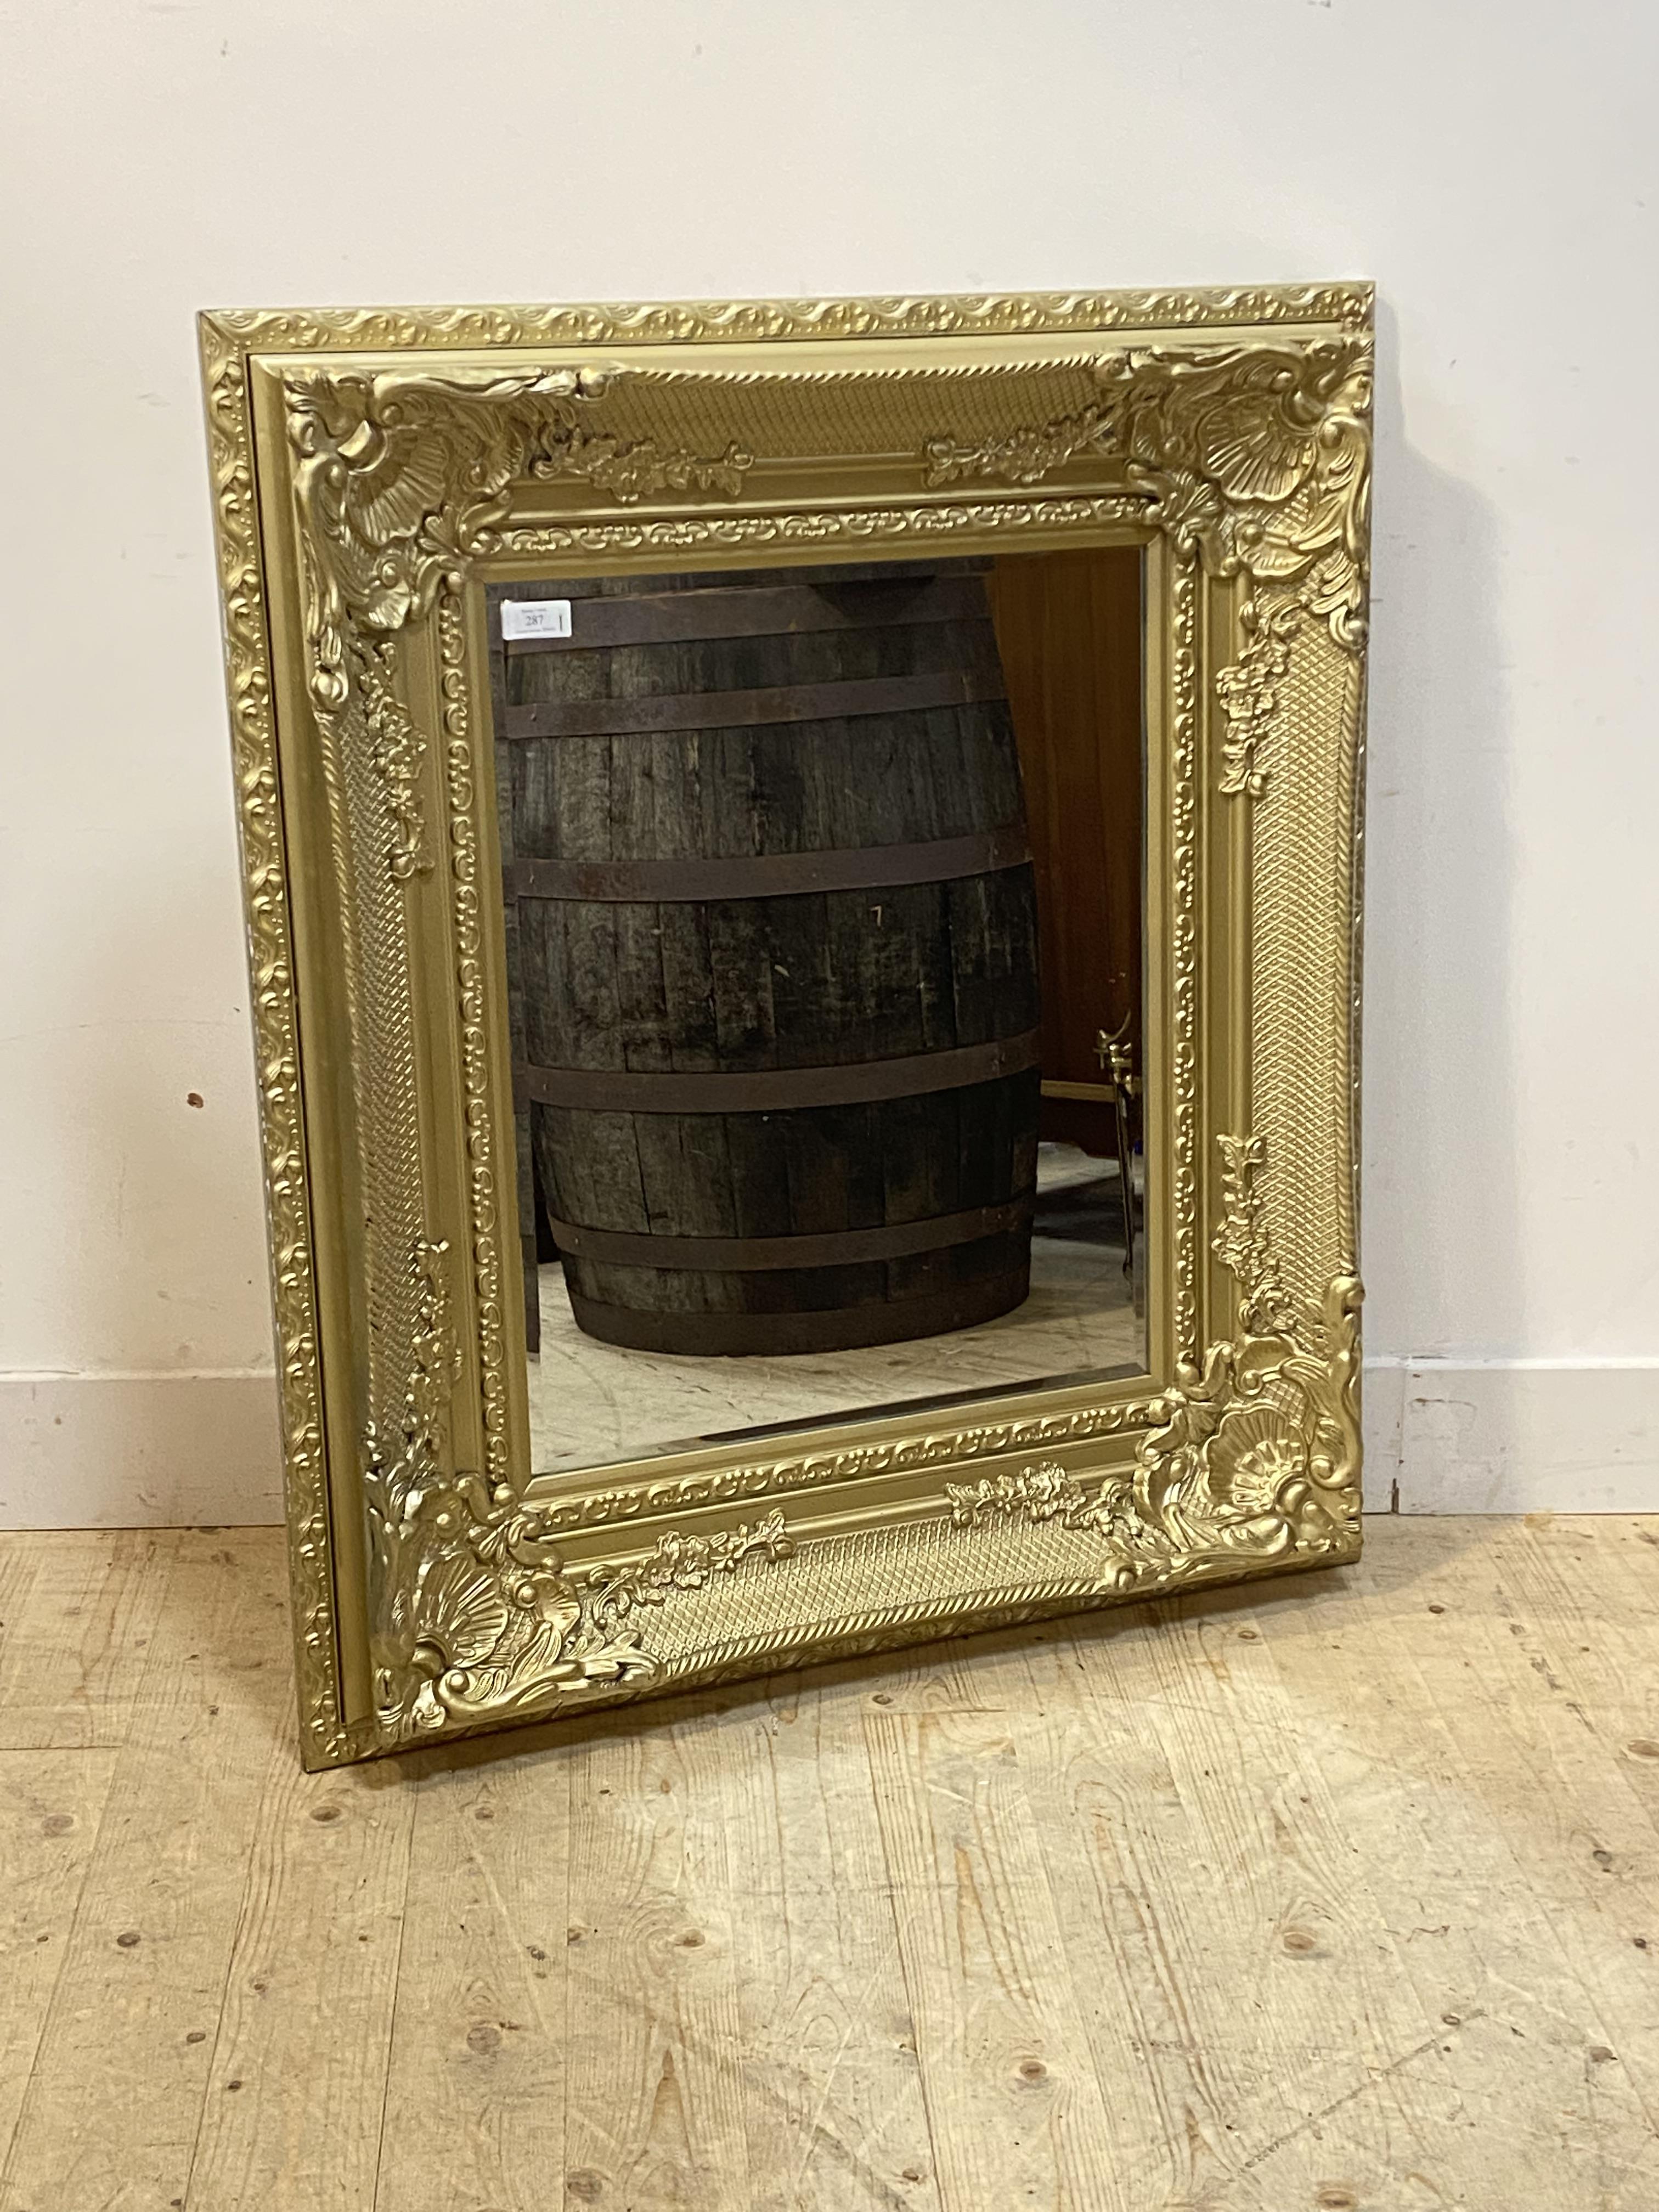 An ornate gilt framed wall mirror in the Rococo style, each corner decorated with shells and